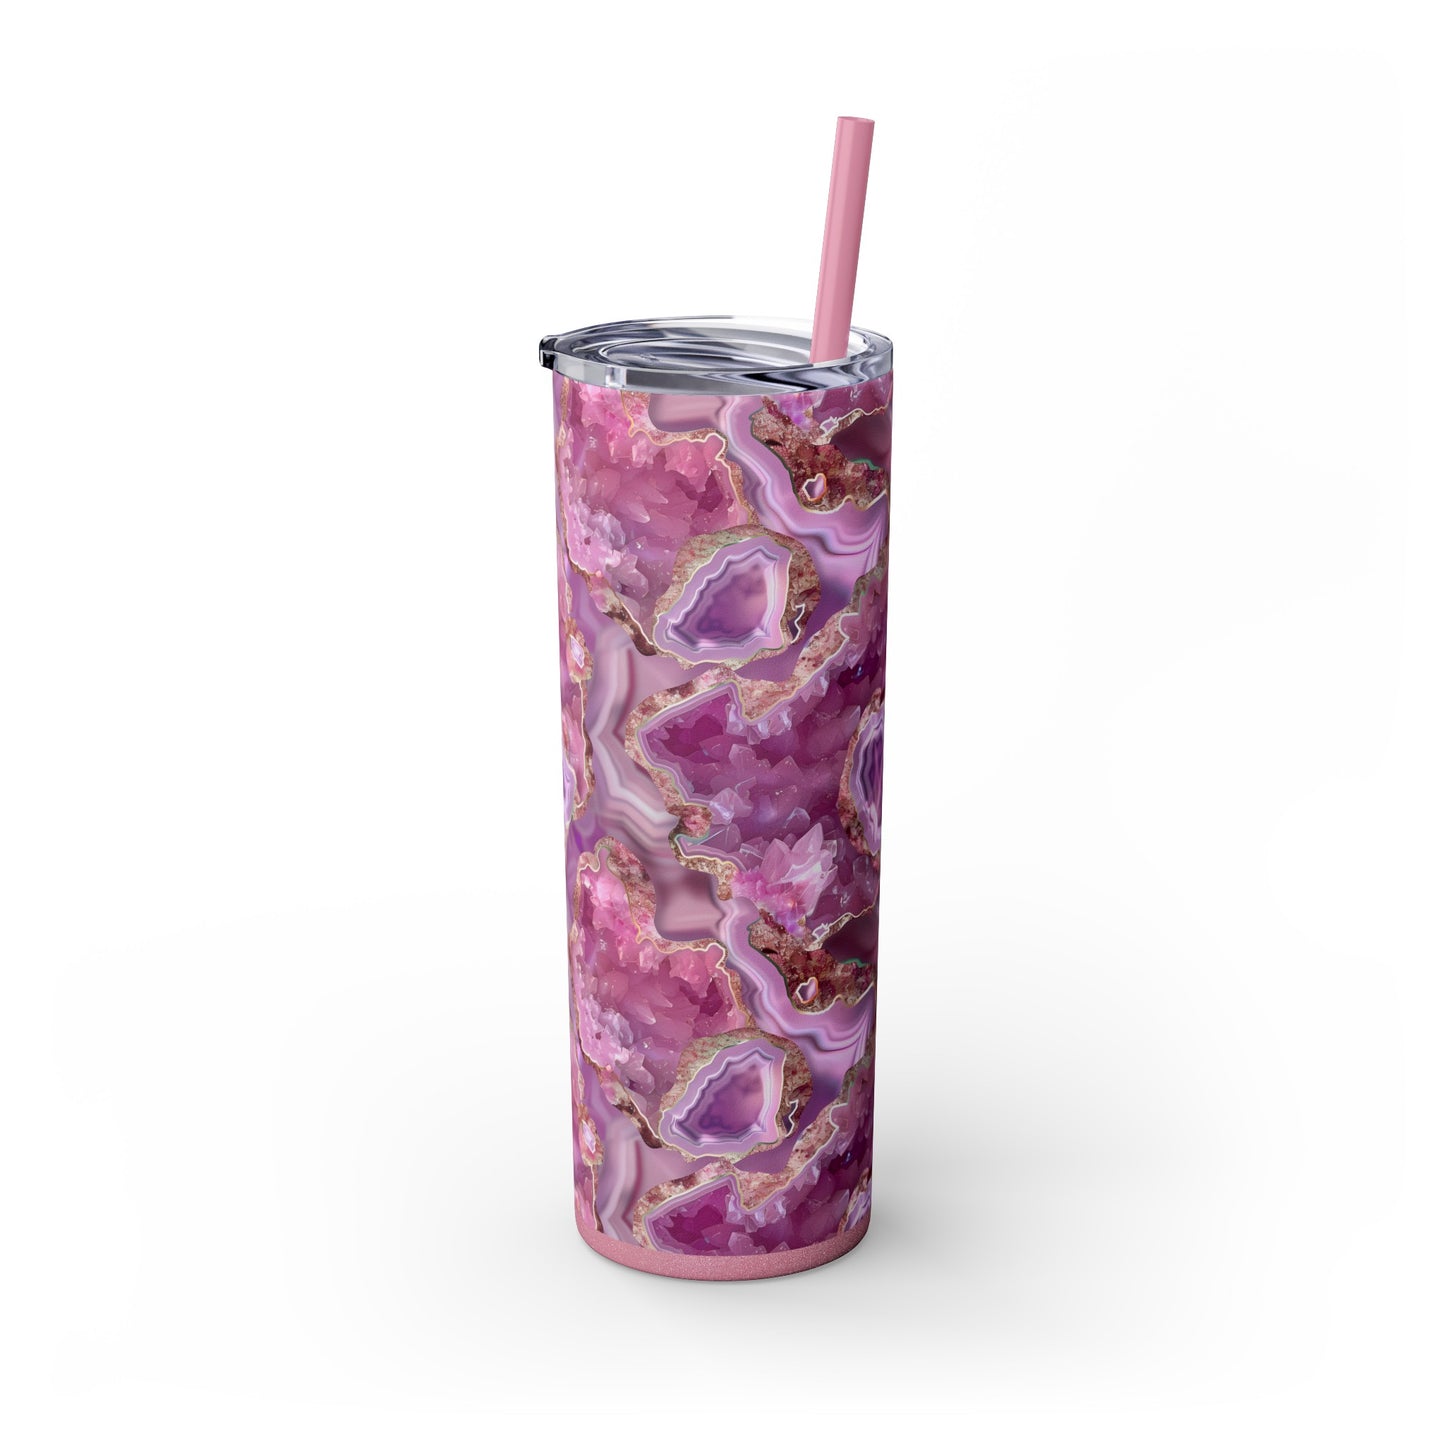 Stainless Steel Tumbler with Lid & Straw, 20 oz, Pink Quartz Geode  - Double-walled, Keeps Drinks Hot or Cold